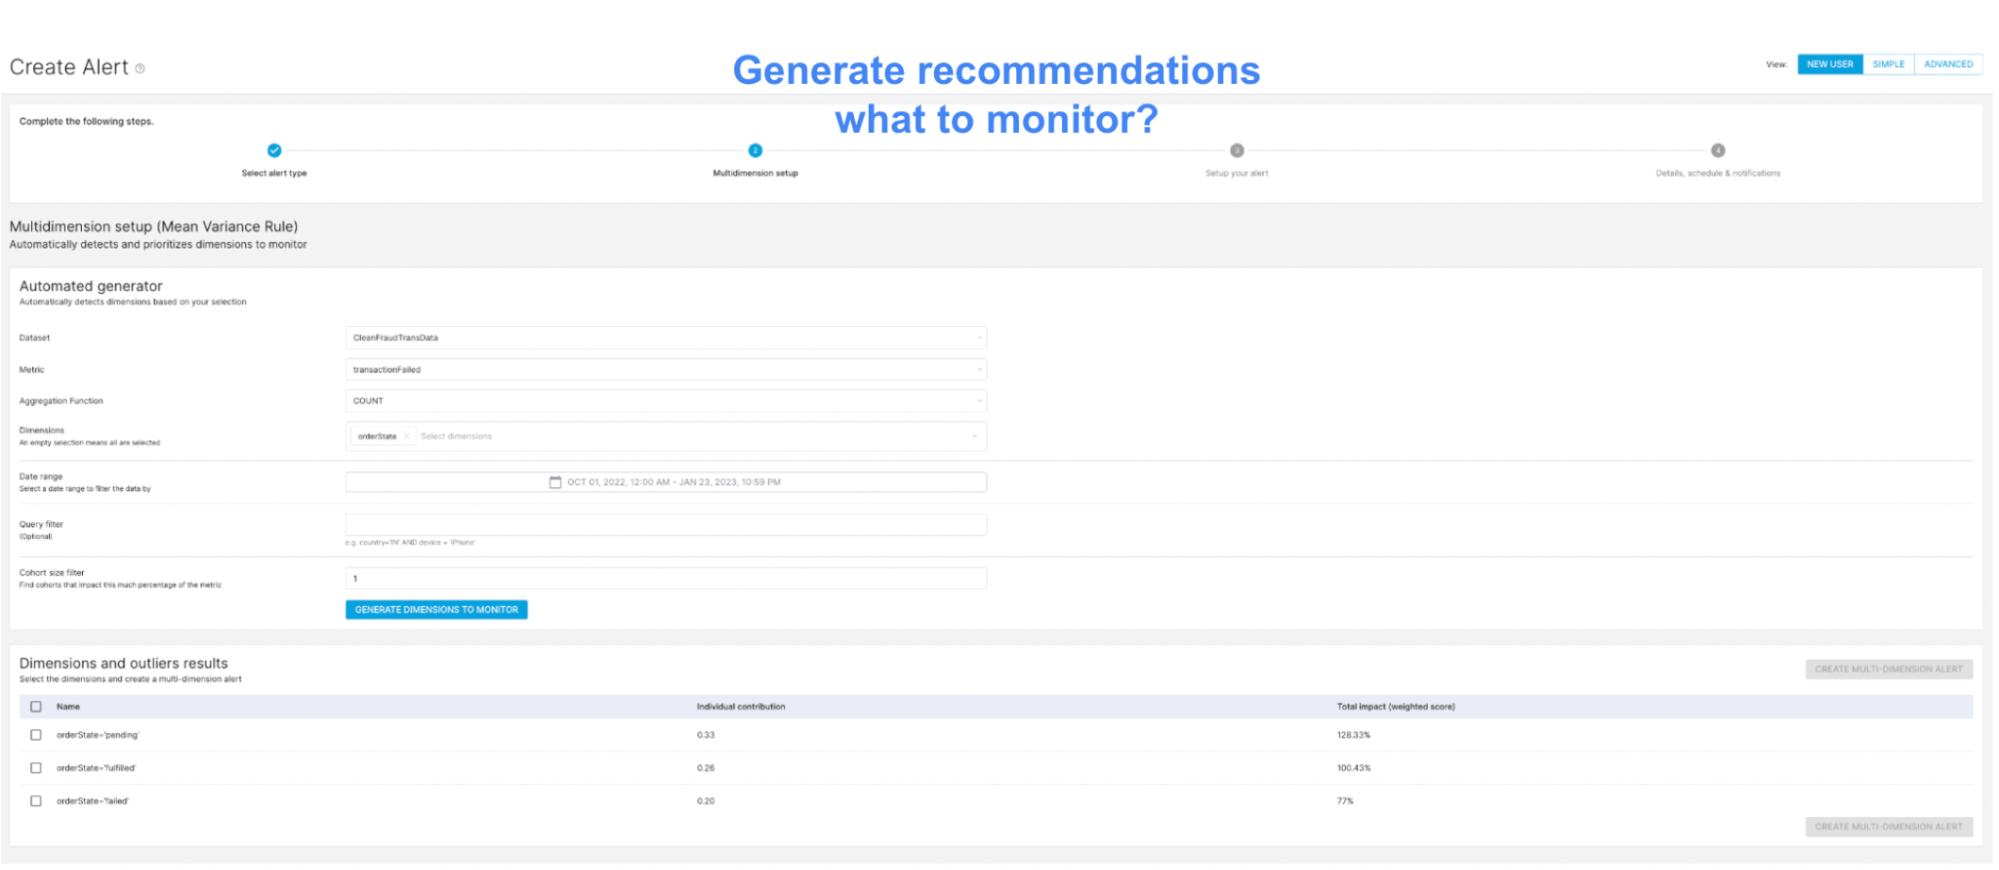 Sample StarTree ThirdEye generated recommendations for monitoring